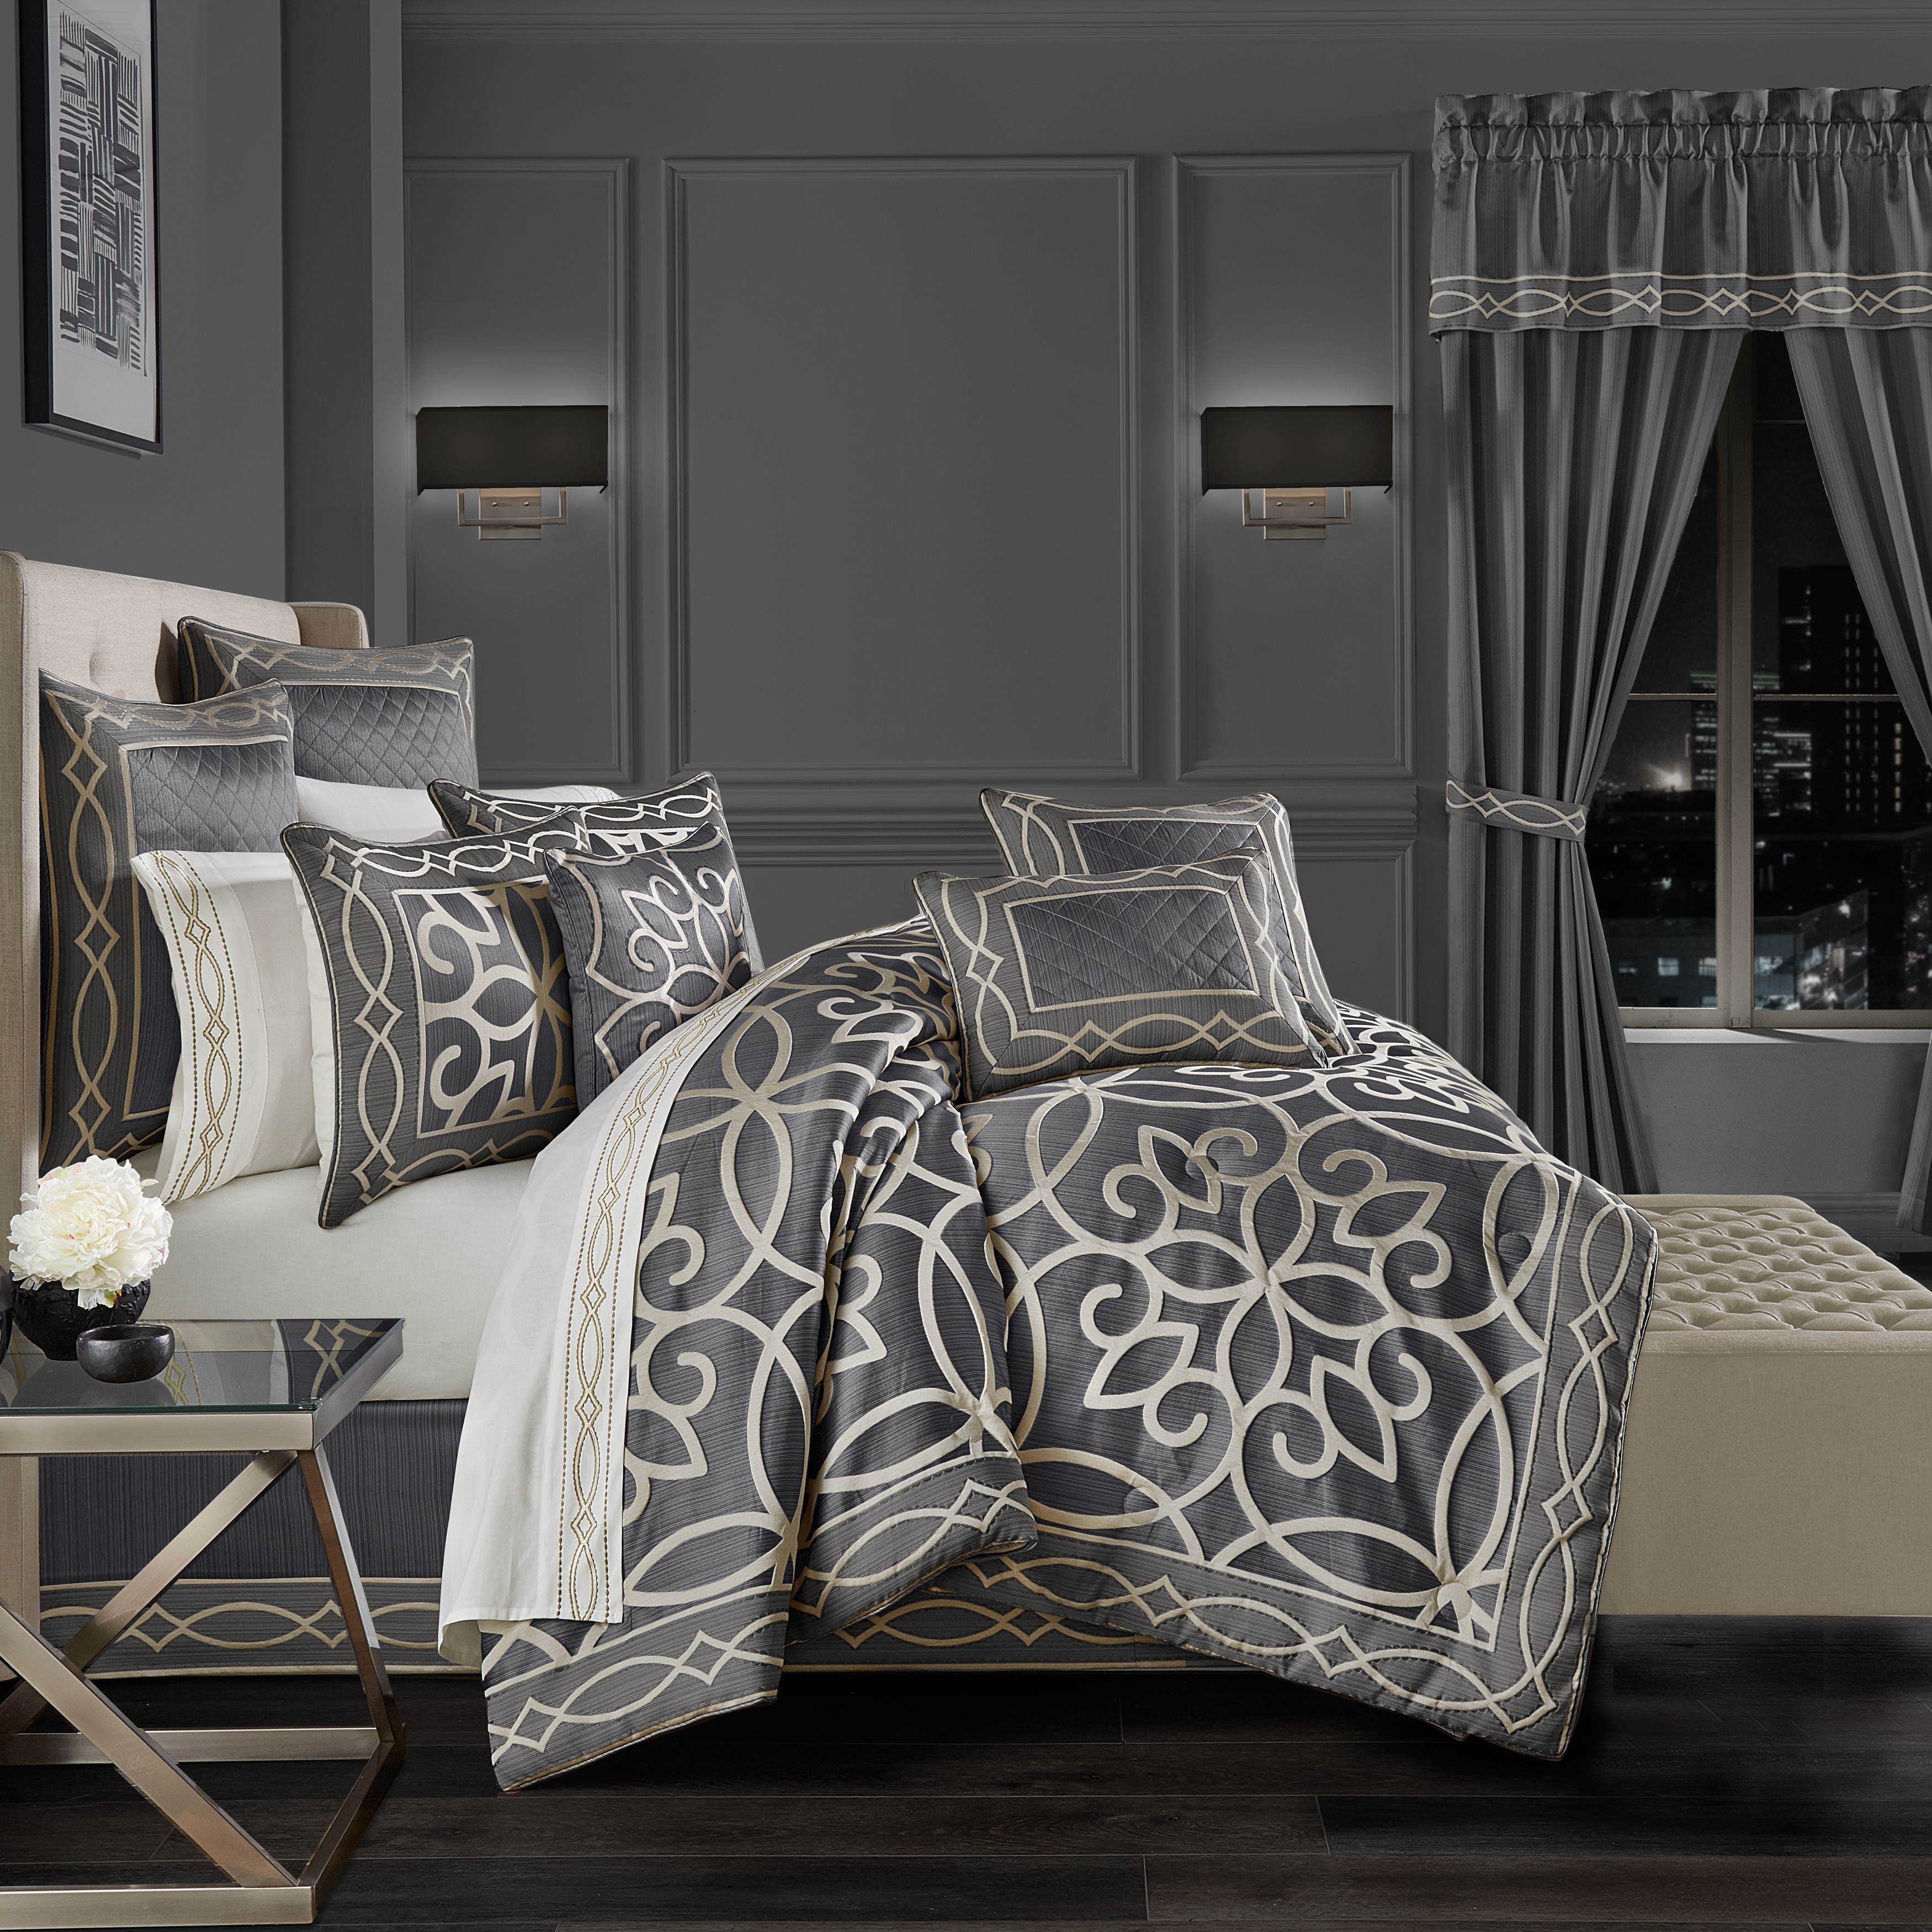 https://ak1.ostkcdn.com/images/products/is/images/direct/4926e3fc9e6220e245f89f8f793bc733365752c1/Five-Queens-Court-Darwin-Charcoal-Comforter-Set.jpg